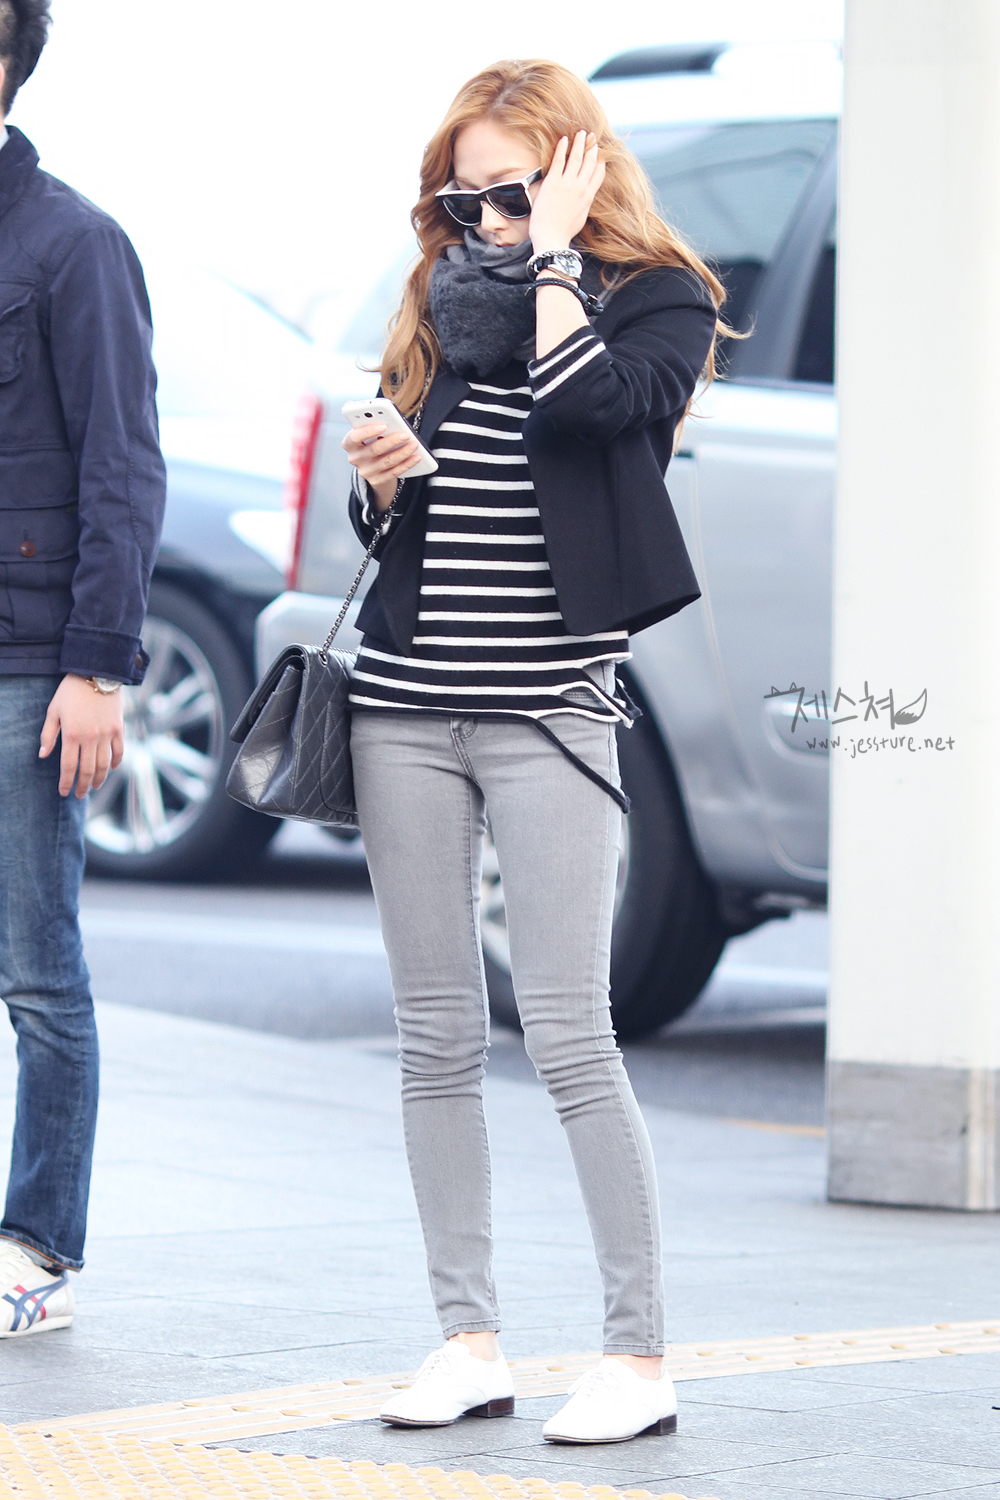 130308 Incheon Airport 1705C4435139F72818820A